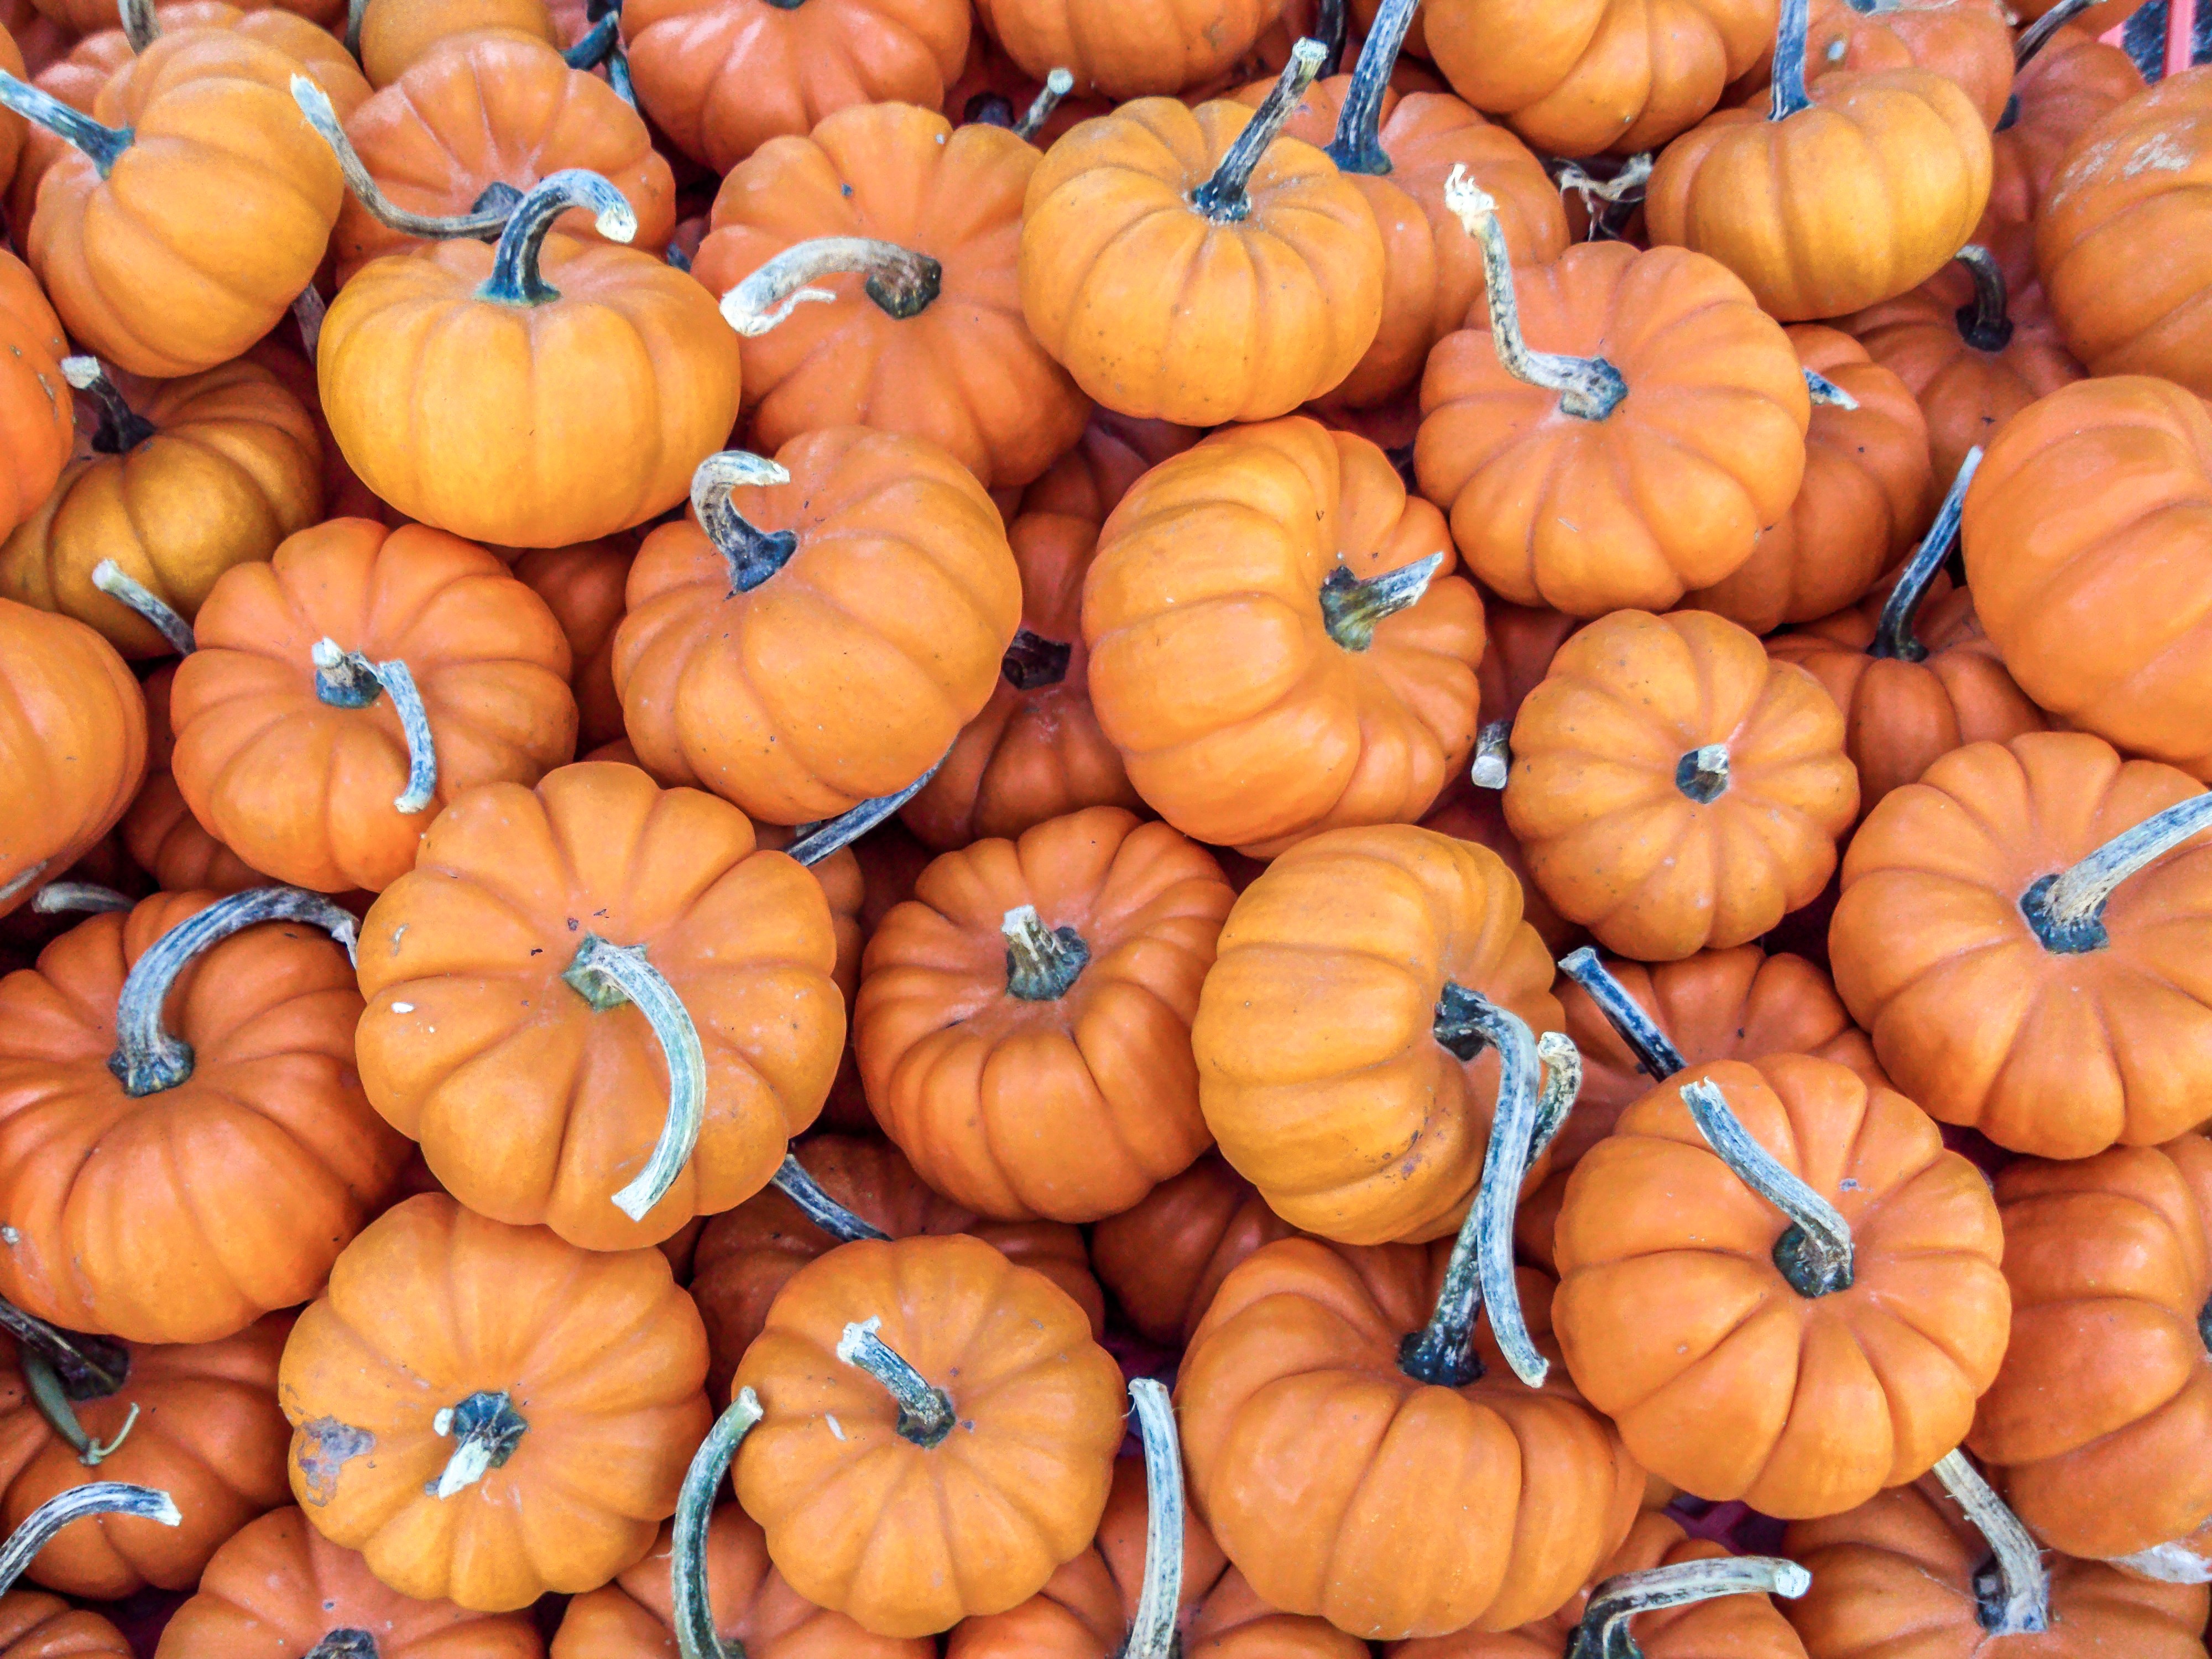 A pile of pumpkins for fall